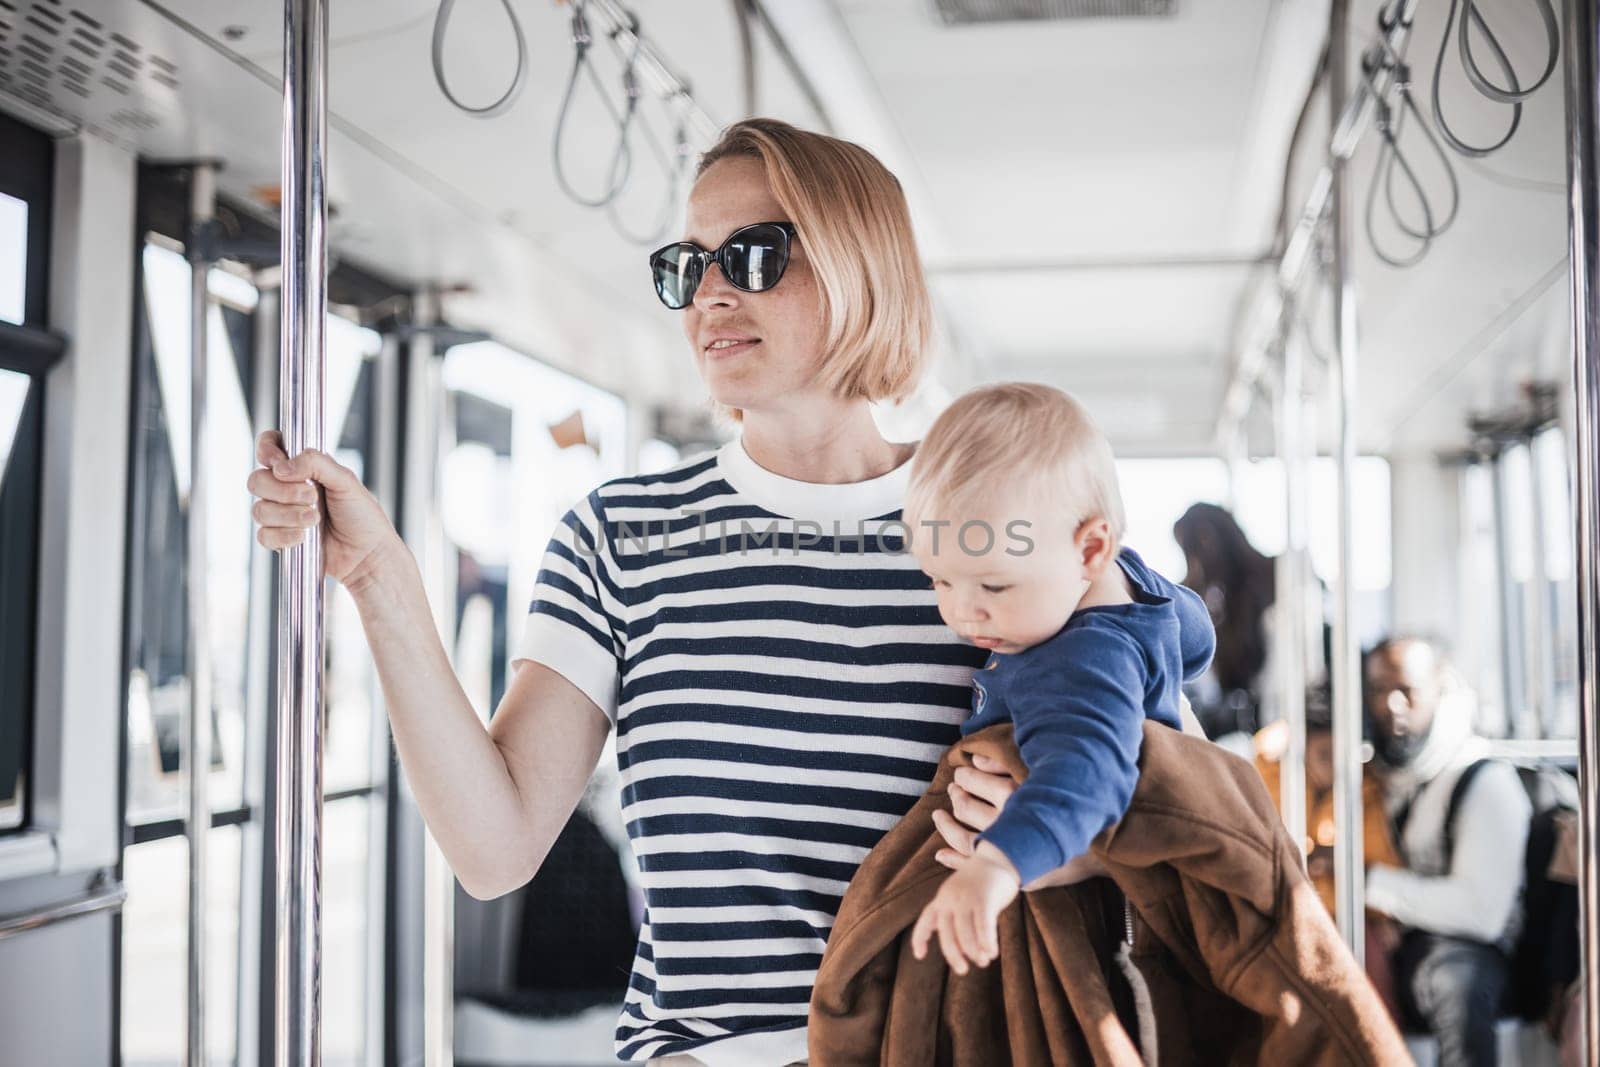 Mother carries her child while standing and holding on to bar holder on bus. Mom holding infant baby boy in her arms while riding in public transportation. Cute toddler traveling with mother